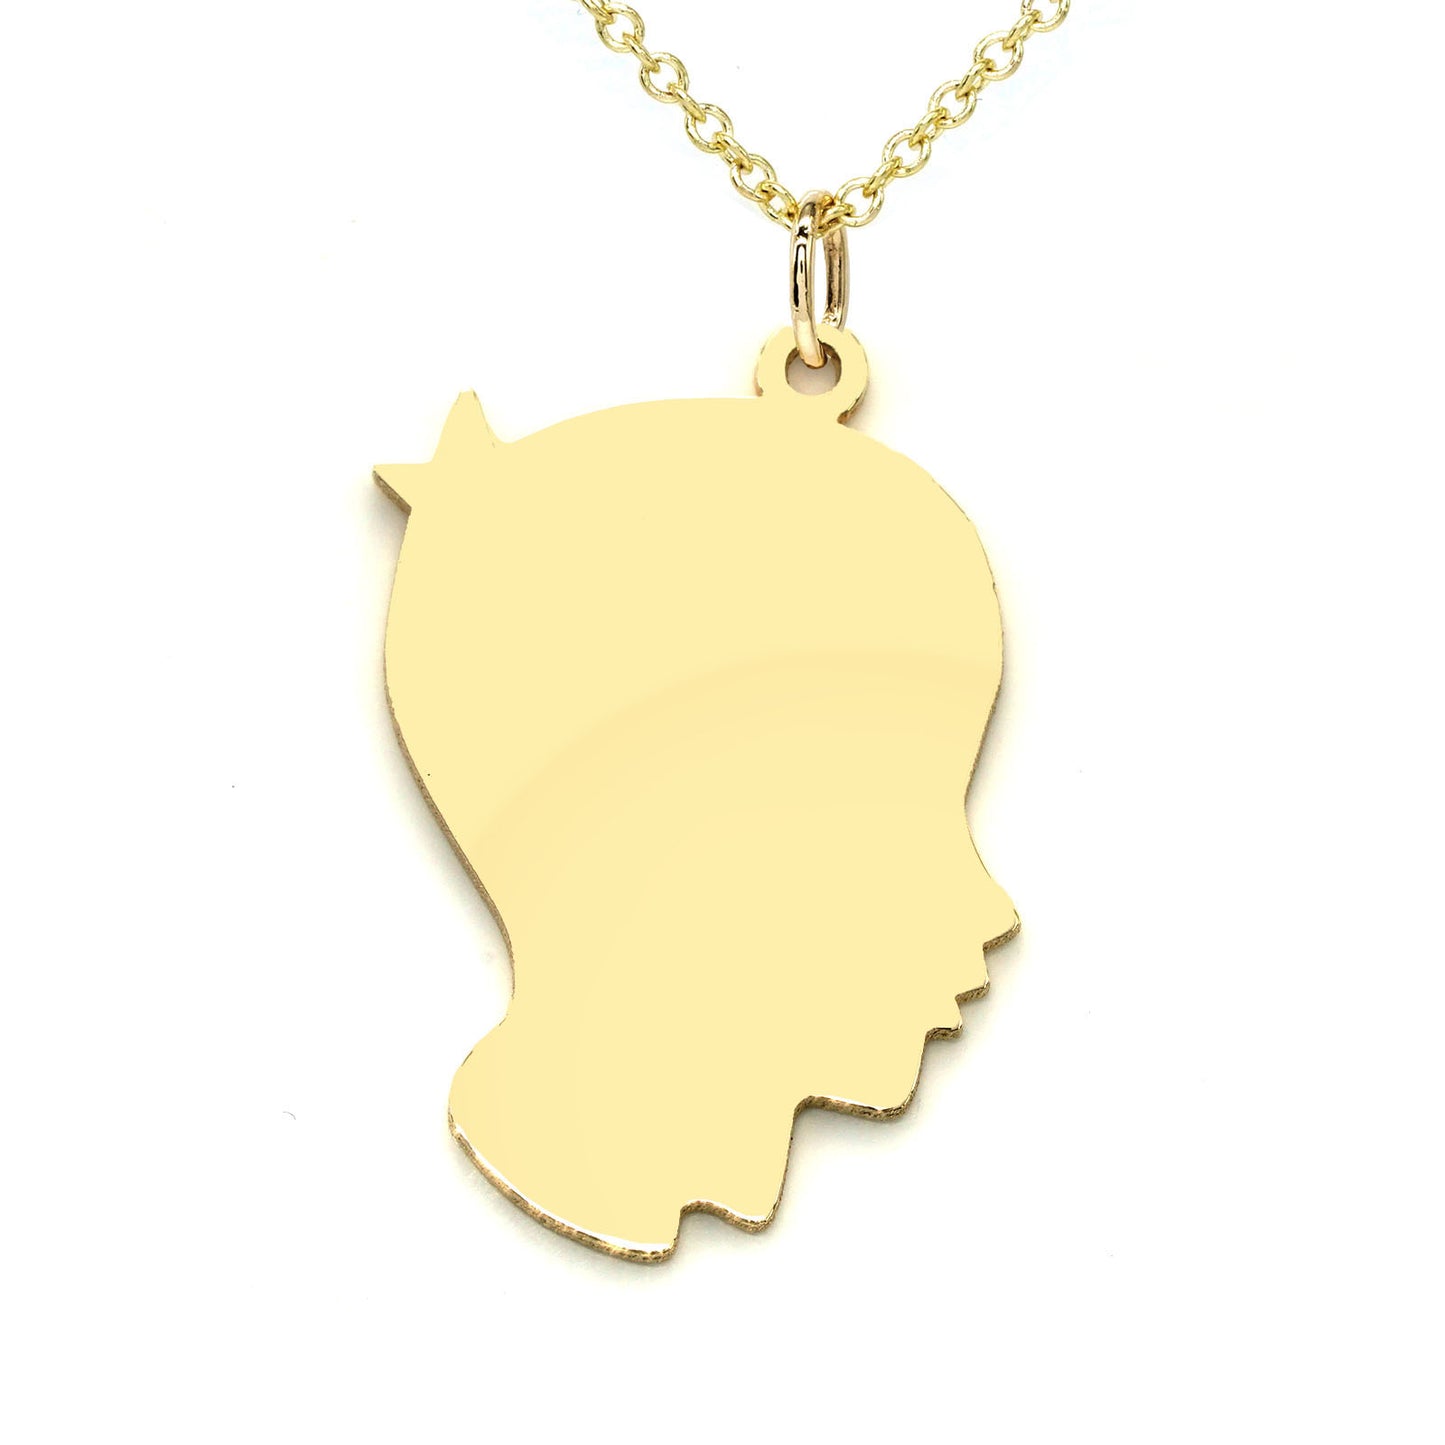 Engravable Boy Profile Charm Pendant in 14K Solid Gold